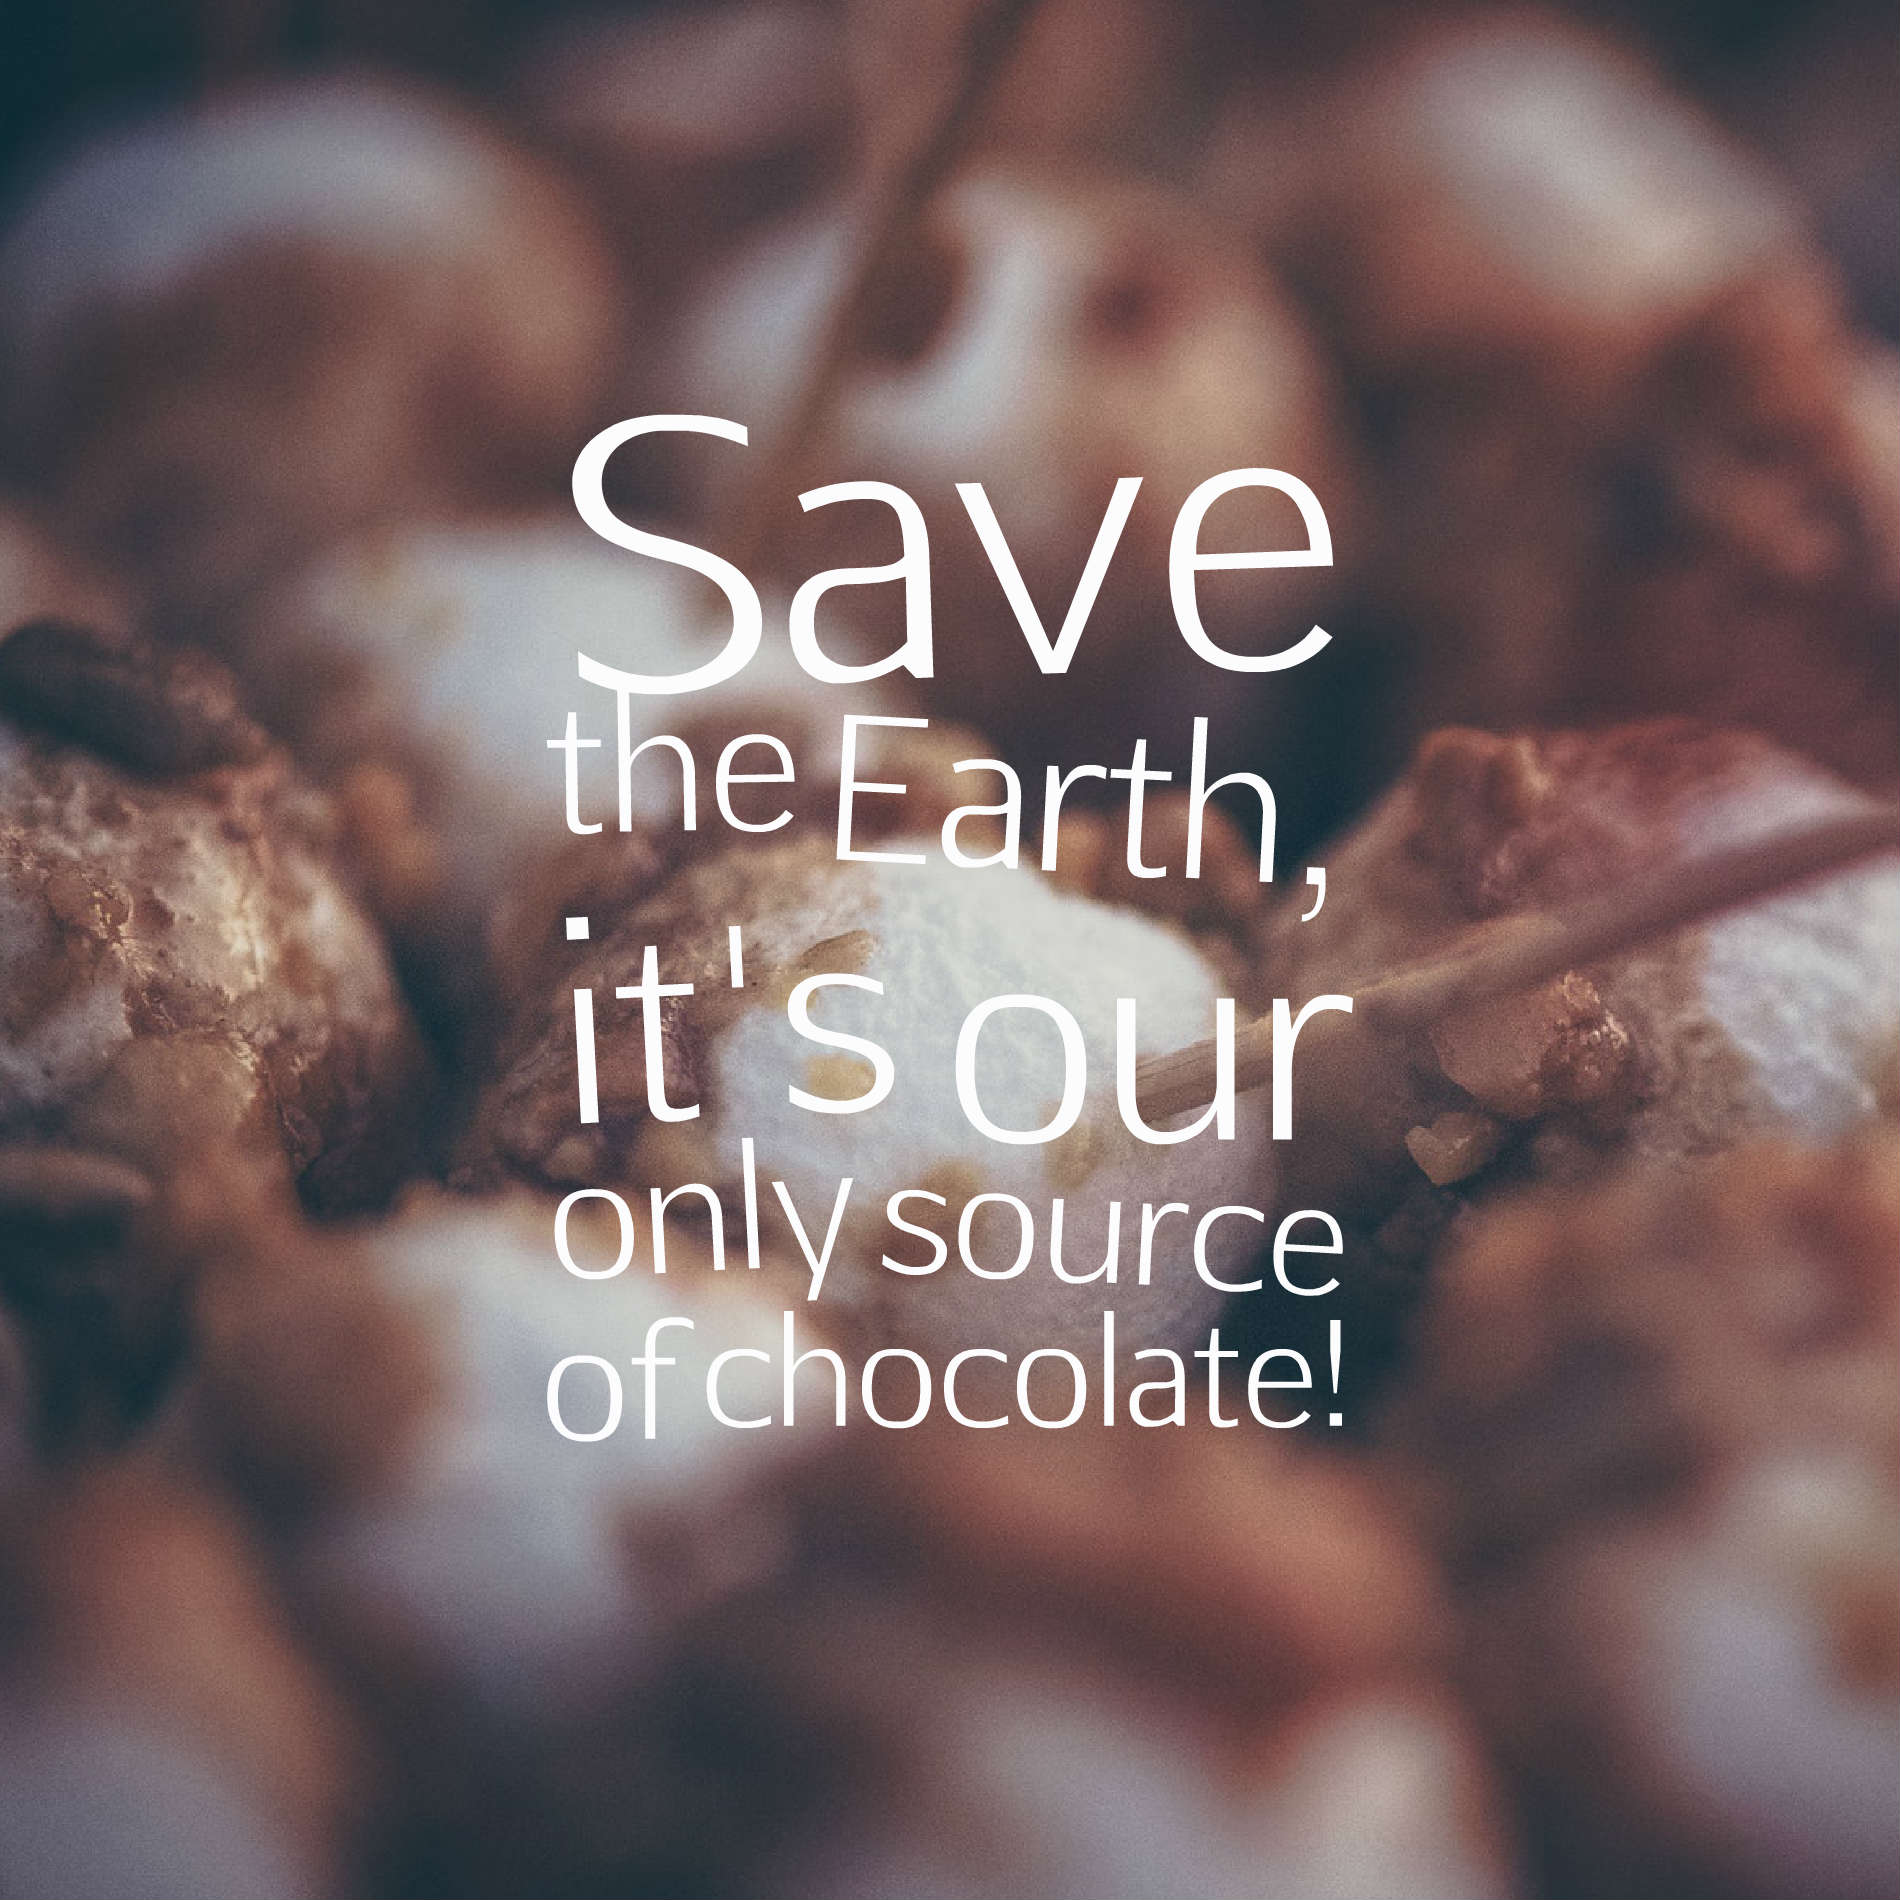 Save the Earth, it's our only source of chocolate!